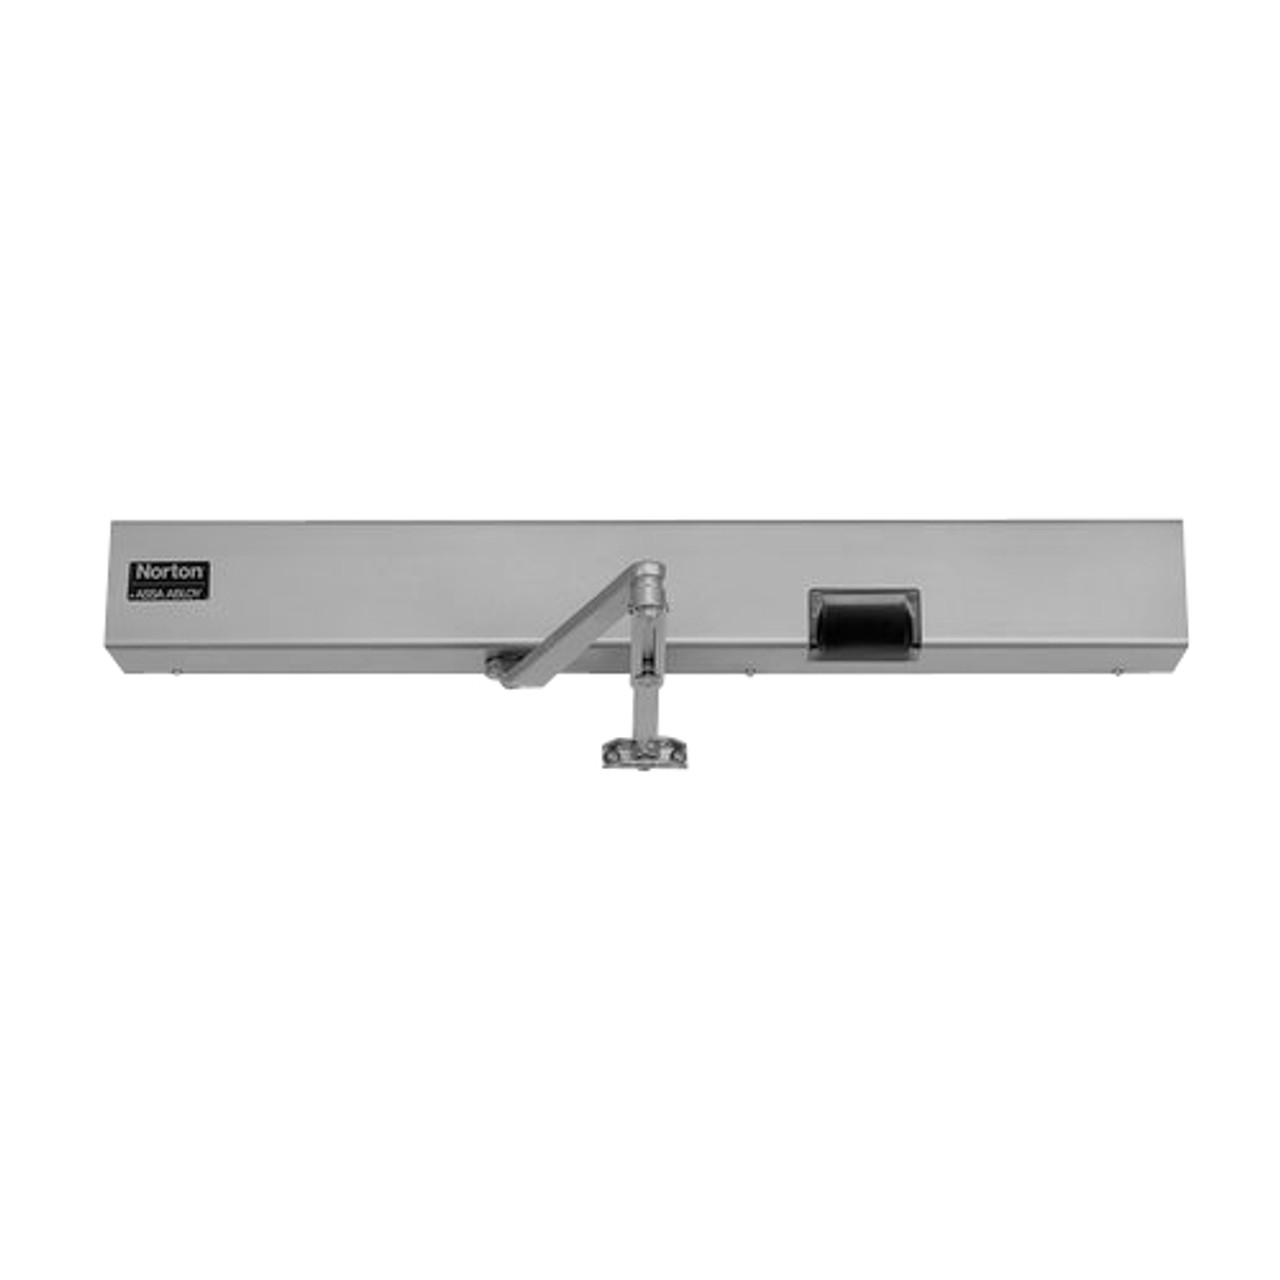 7125SZ-LH-120VAC-689 Norton 7100SZ Series Safe Zone Multi-Point Closer/Holder with Motion Sensor and Push Side Double Lever 11 inch Main Arm in Aluminum Finish